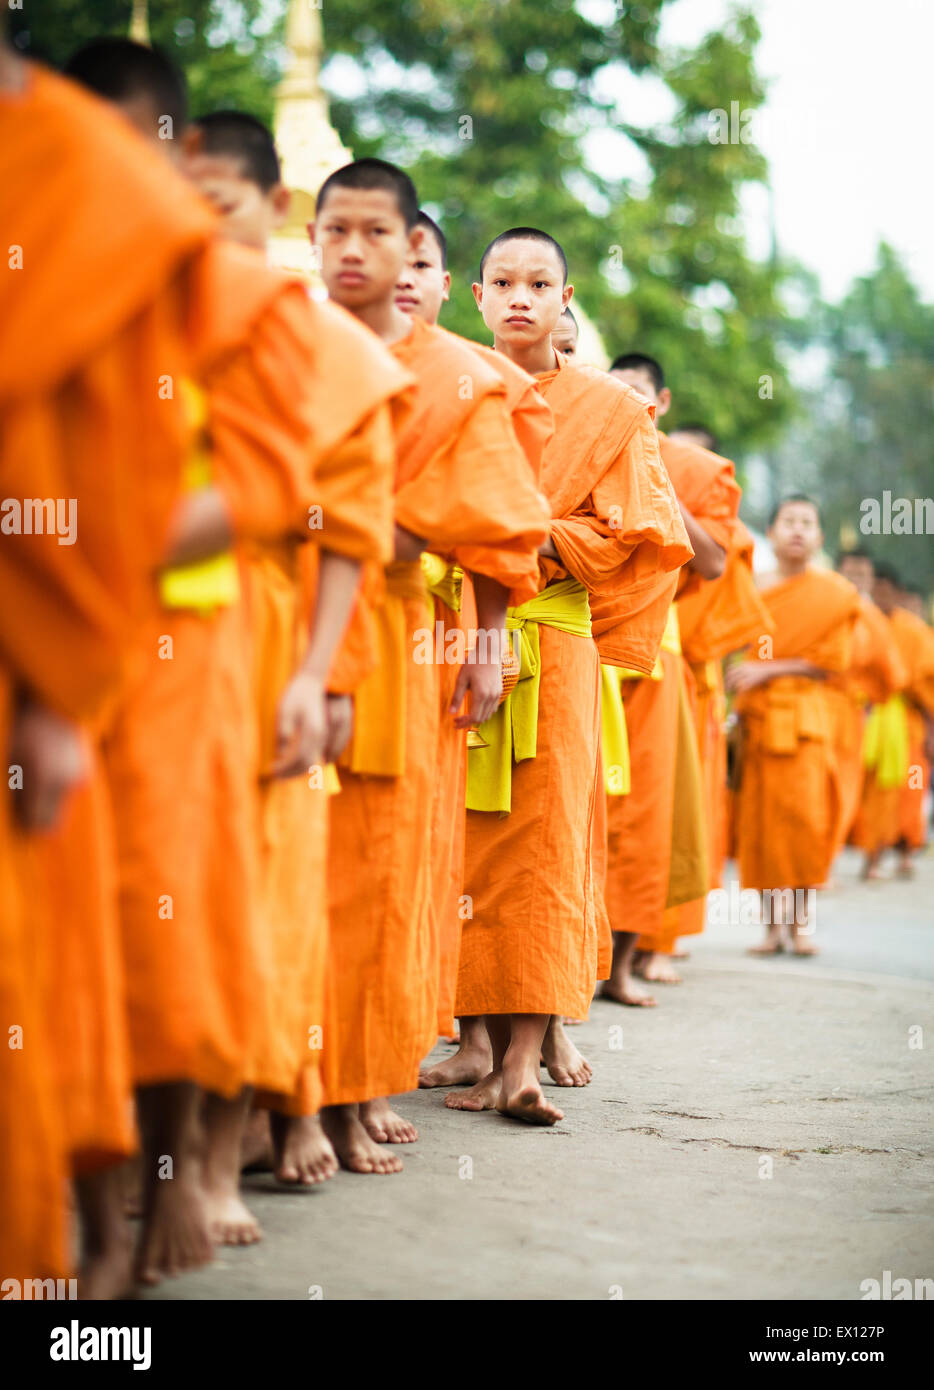 Monks processing for alms in the early morning, a 1,000-year old tradition in Luang Prabang, Laos.. Stock Photo